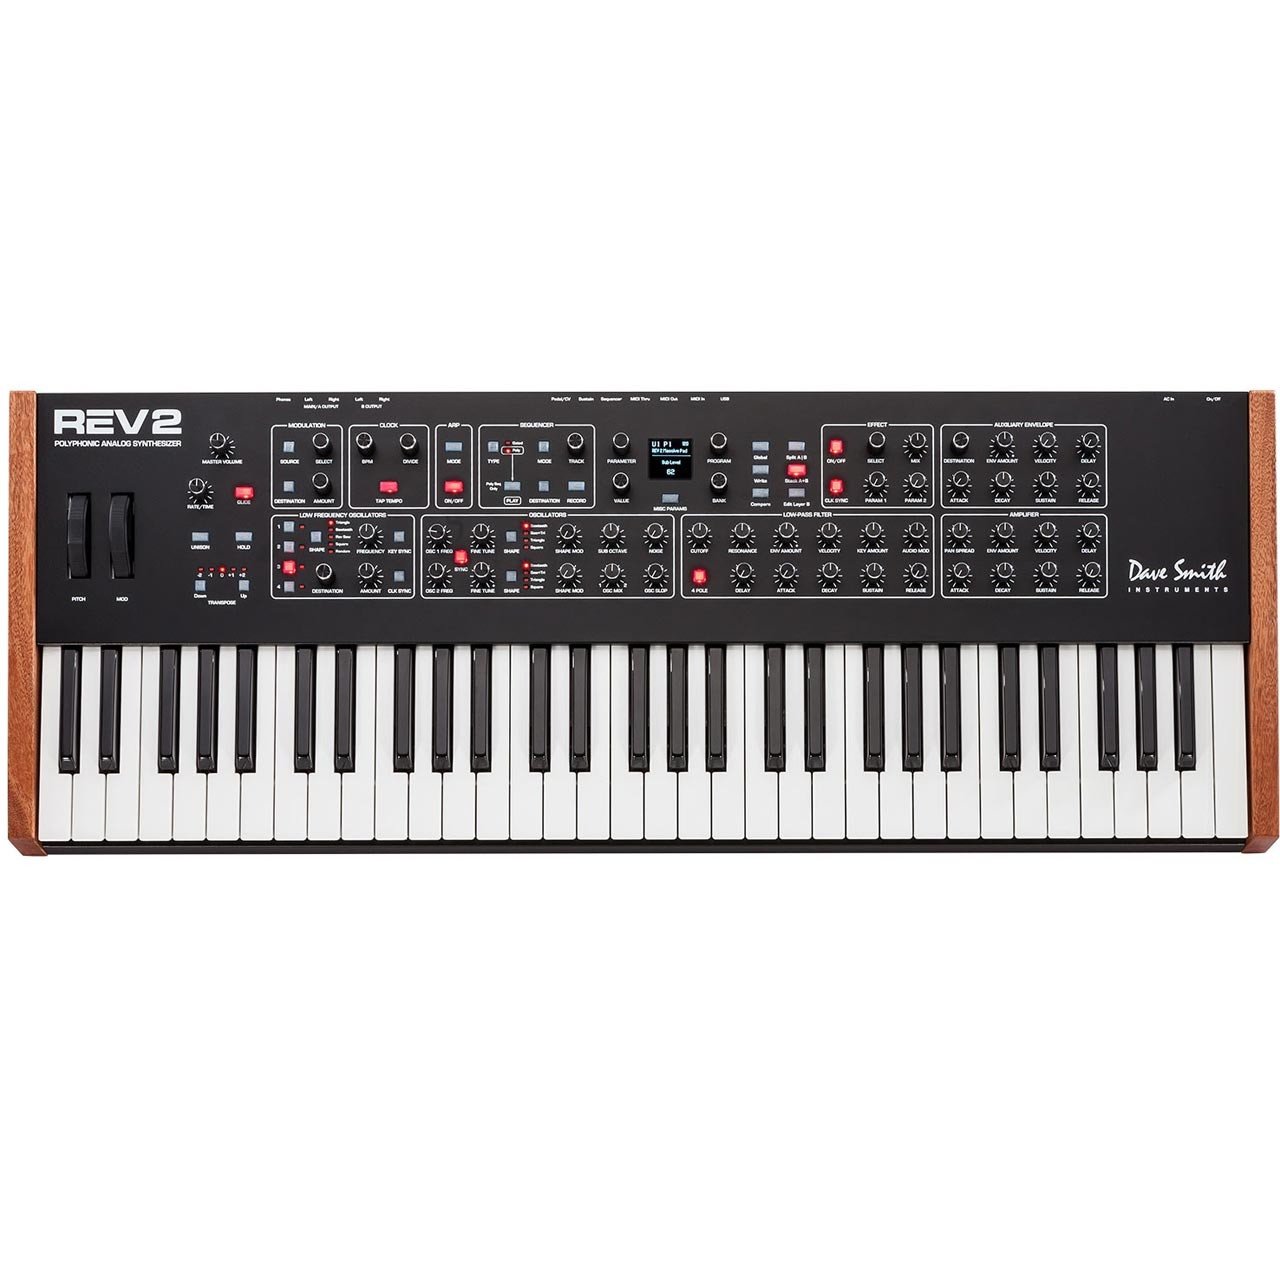 Keyboard Synthesizers - Dave Smith Instruments Prophet REV 2 Analog Synth